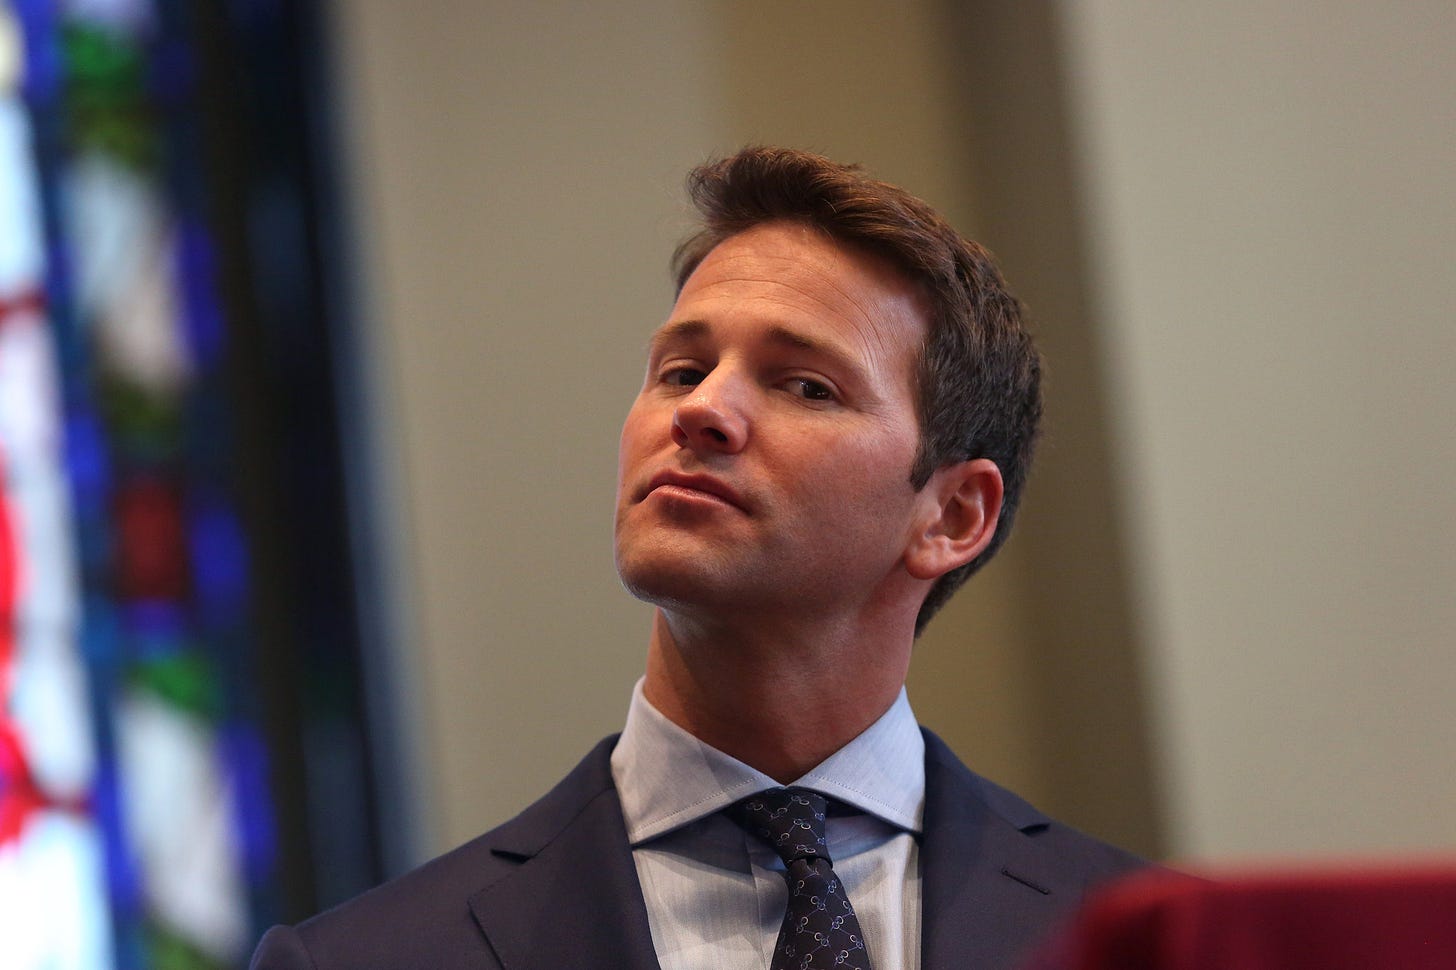 Schock spent big in last 3 months in office on gifts, meals, travel - Chicago Tribune